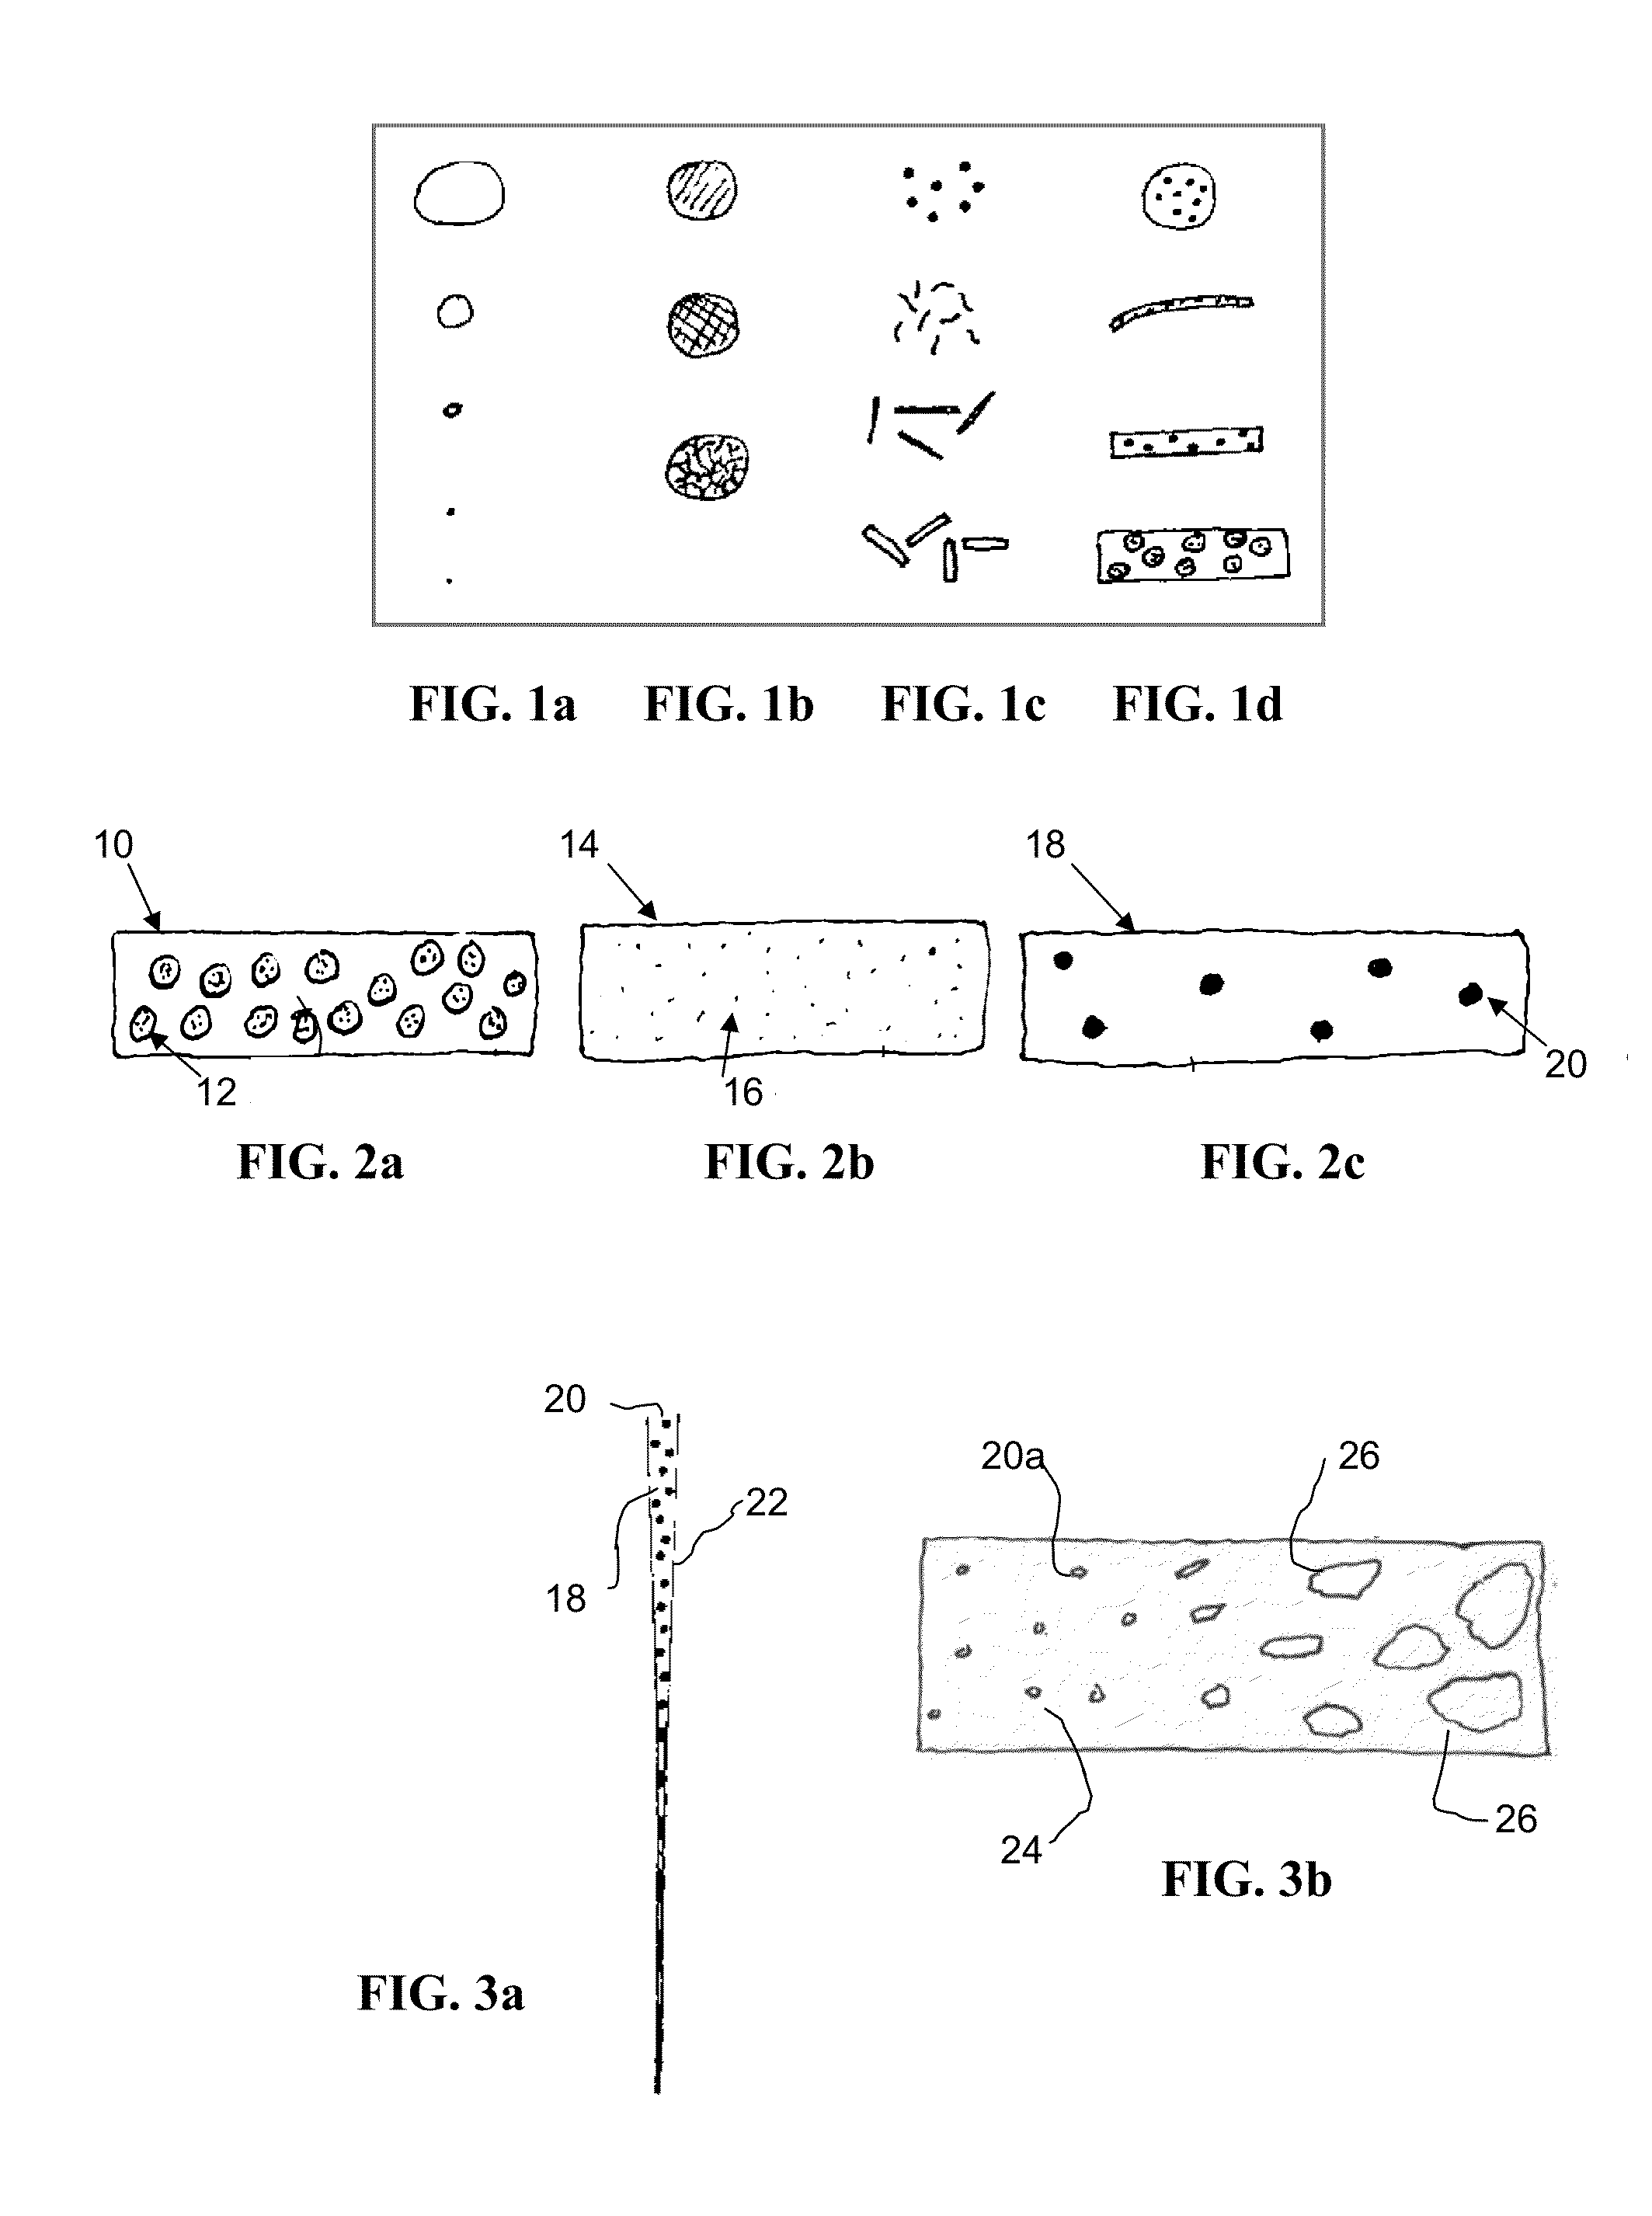 Method of increasing fracture network complexity and conductivity